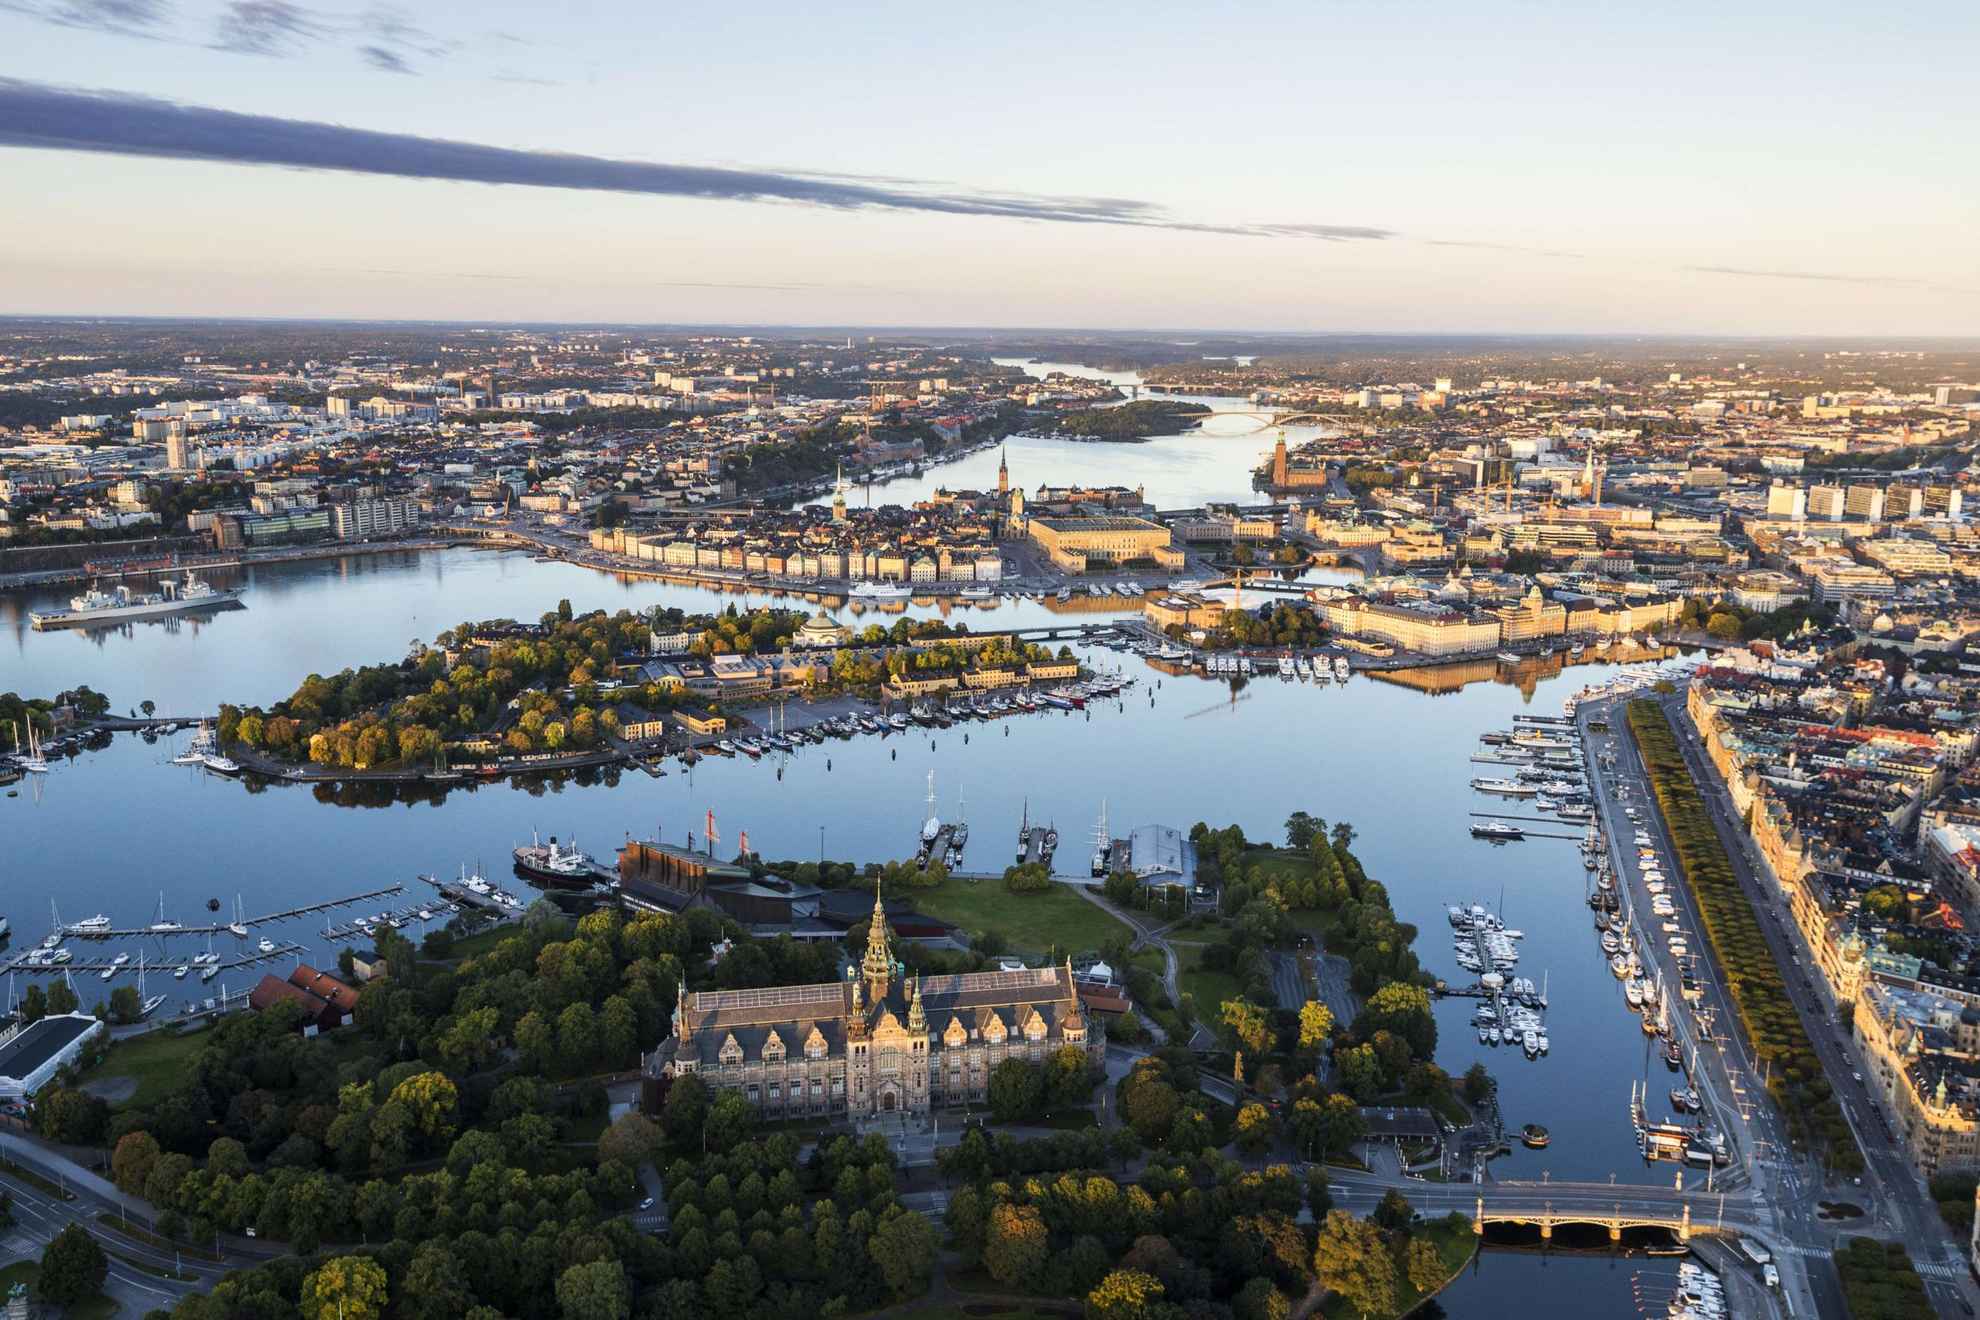 Aerial view of water all around the island of Djurgården and the boats along the quays.